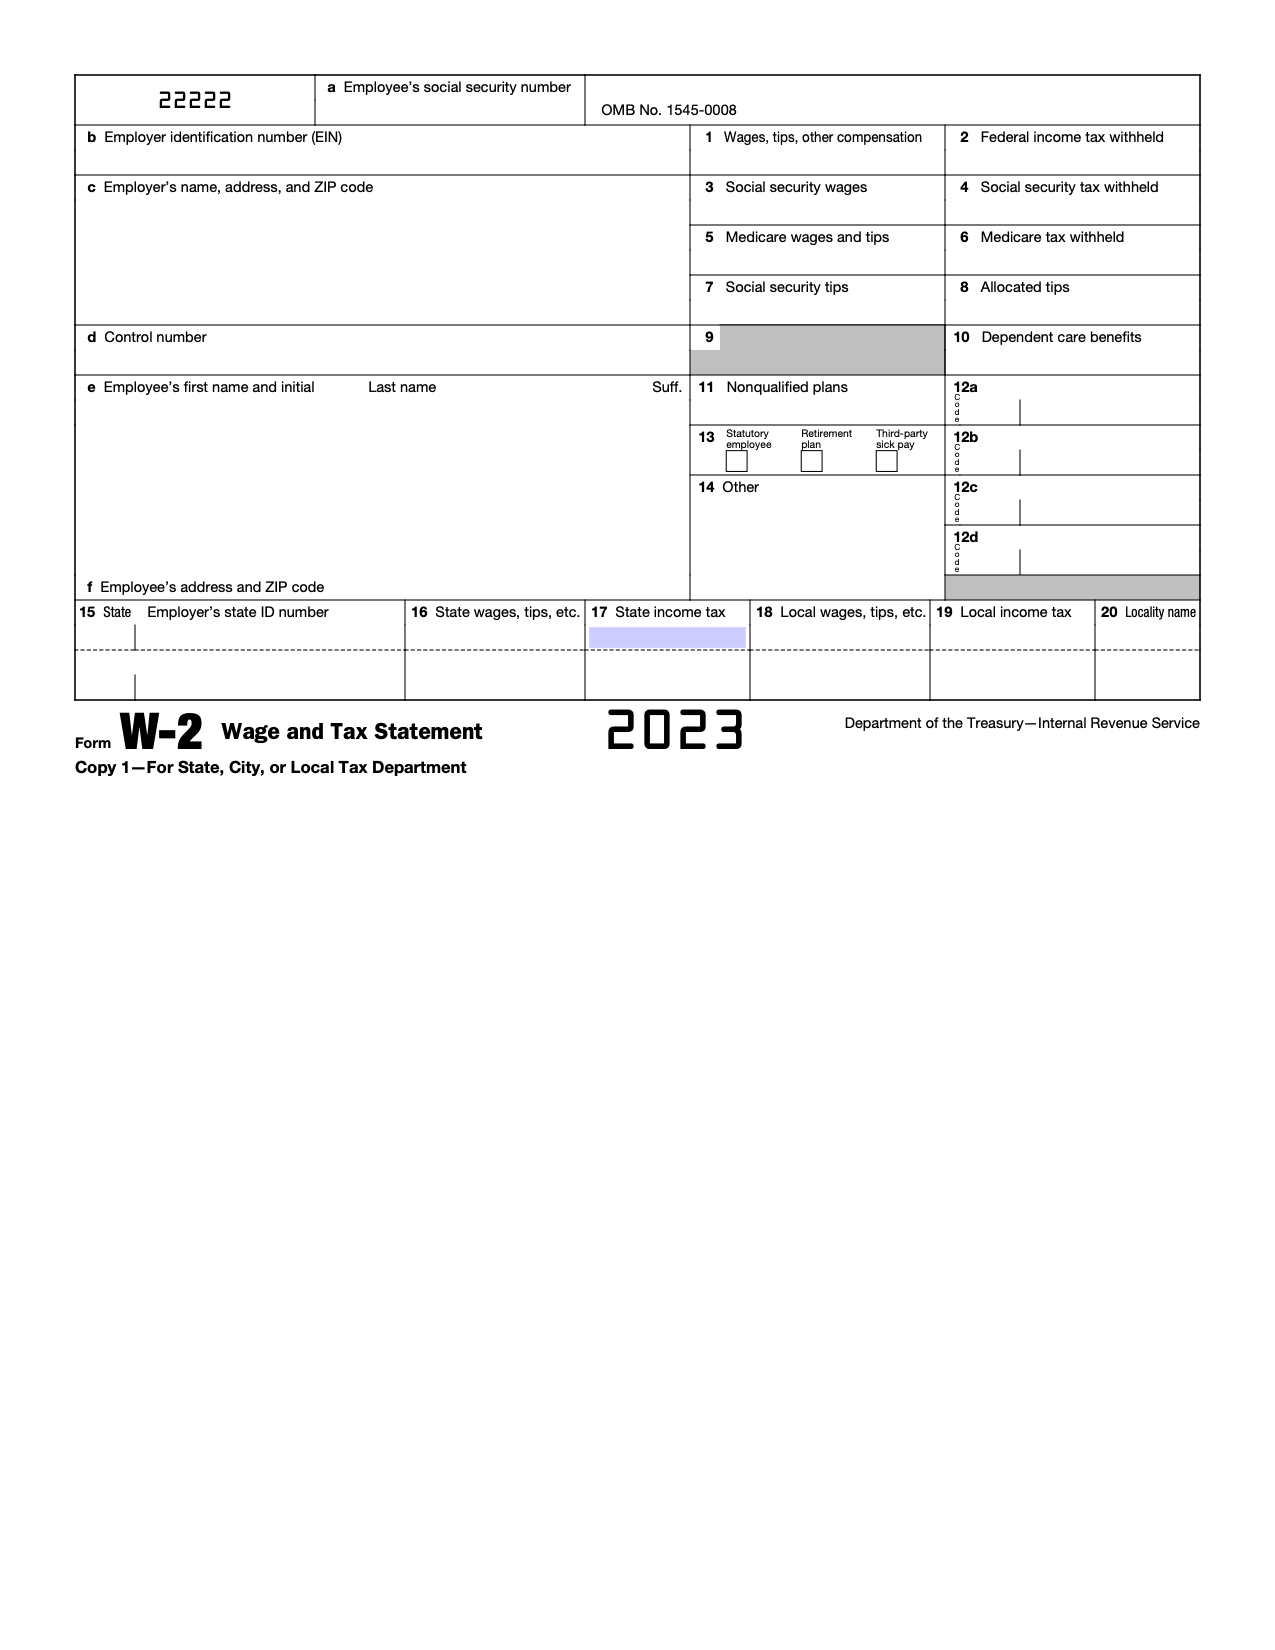 Free Irs Form W-2 | Wage And Tax Statement - Pdf – Eforms for W2 Form 2024 Printable